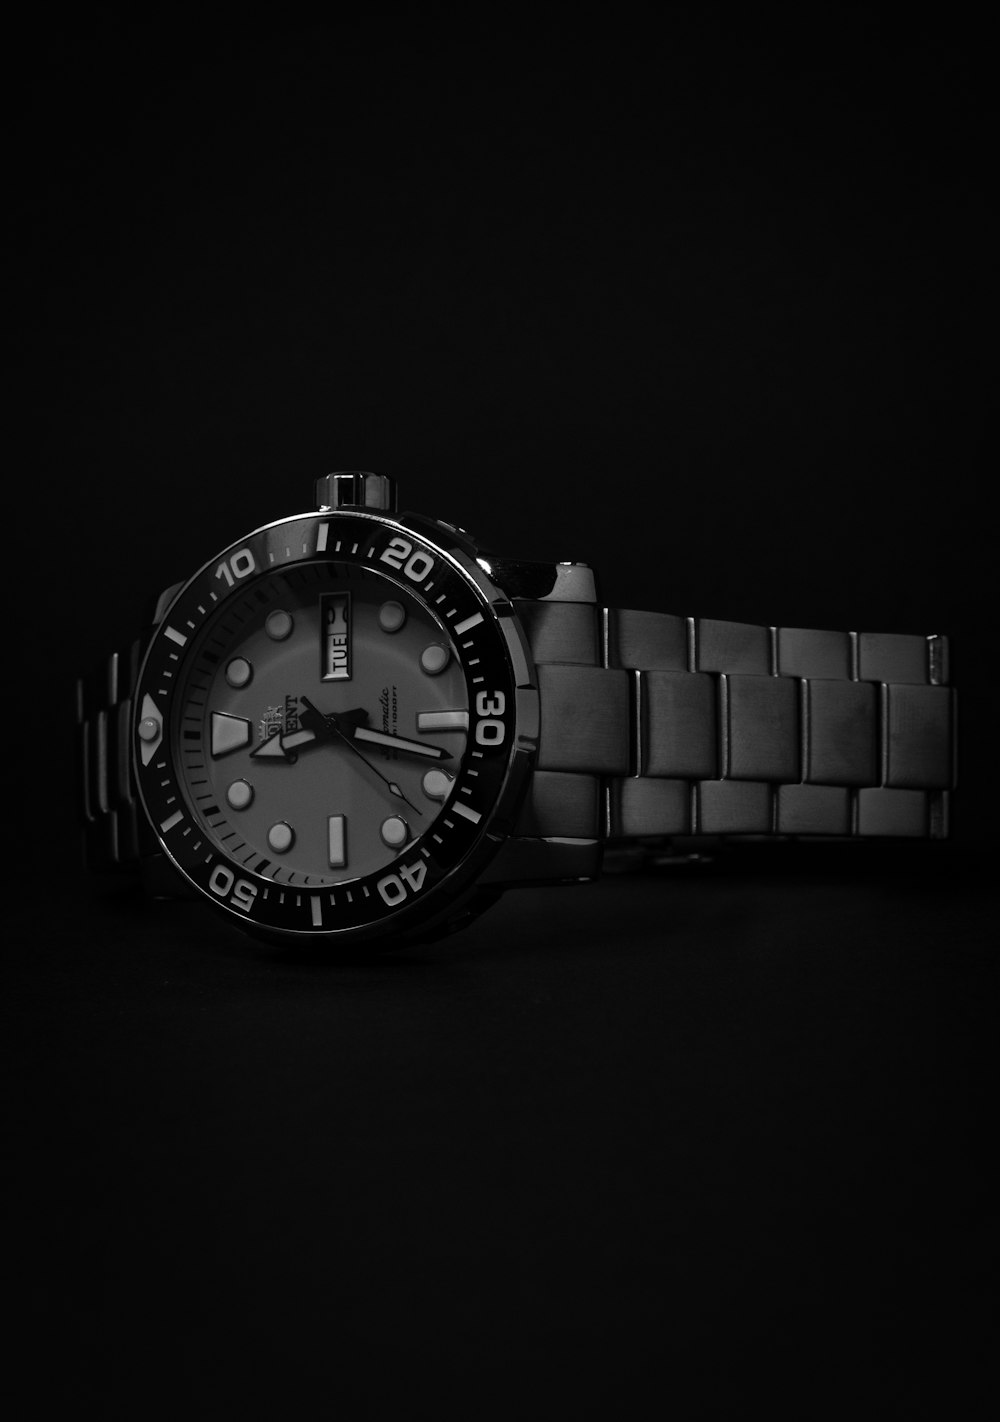 a watch is shown on a black background